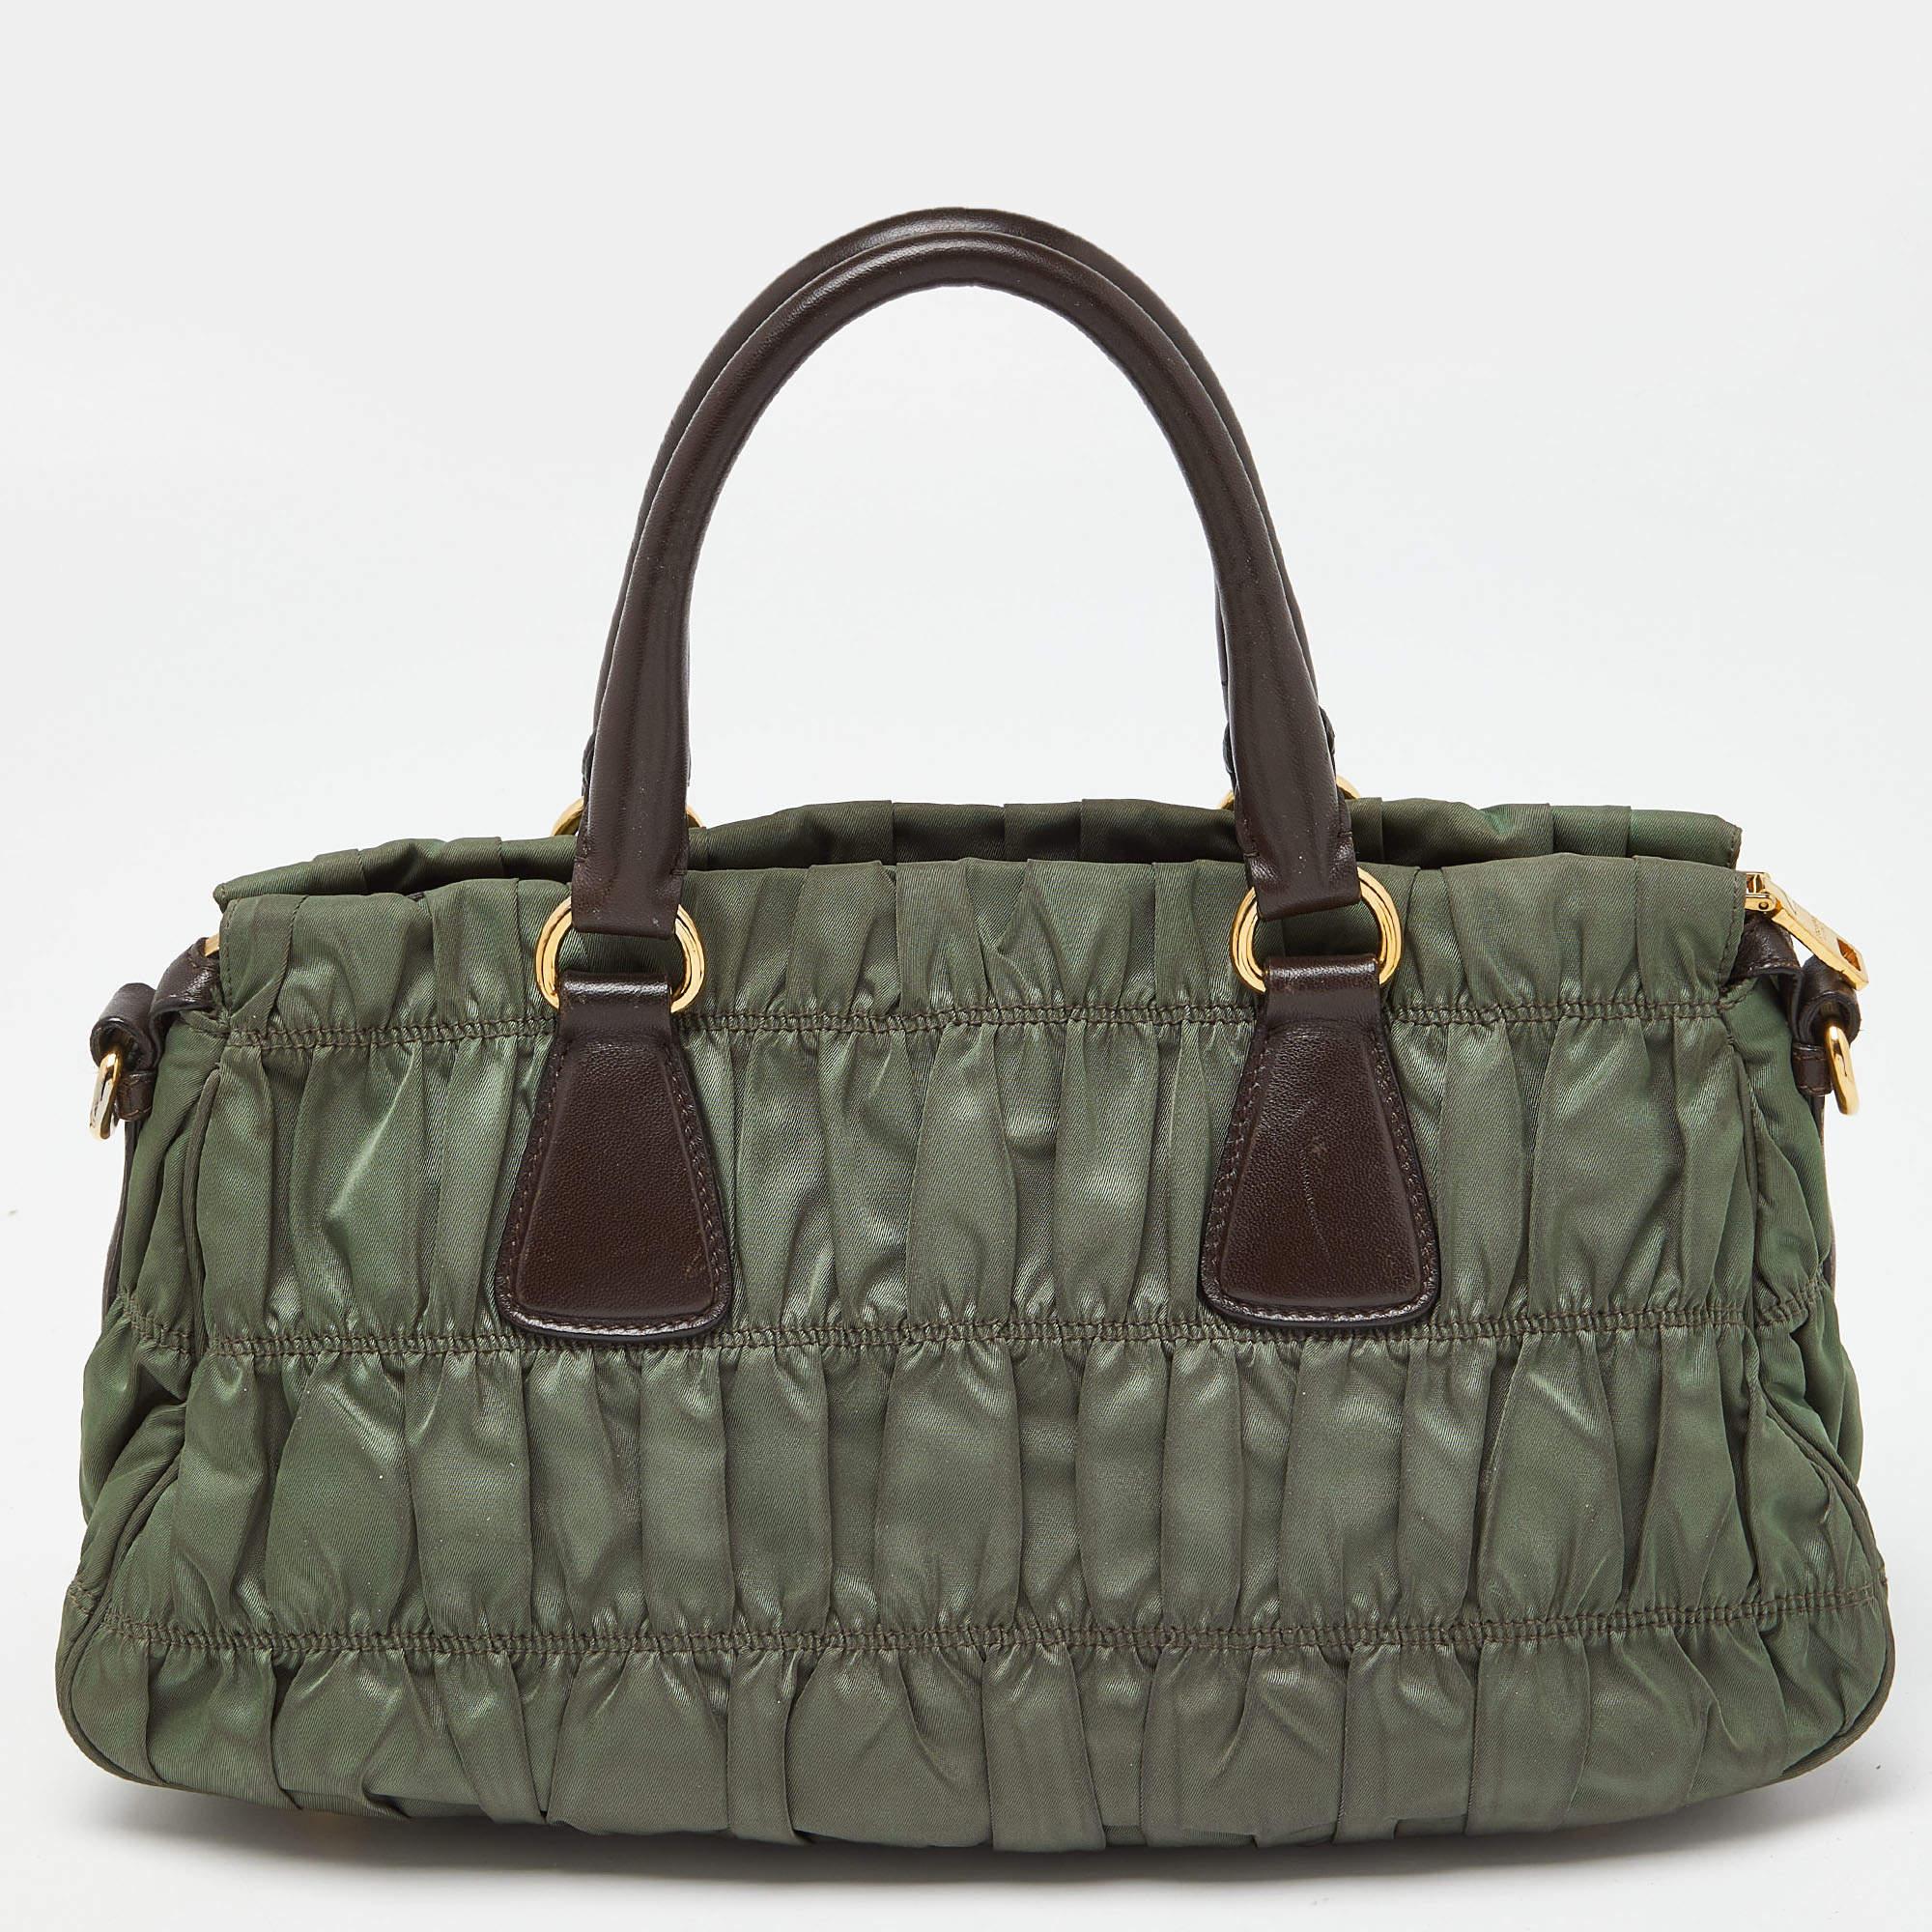 Prada Green/Brown Gaufre Nylon and Leather Tote For Sale 4